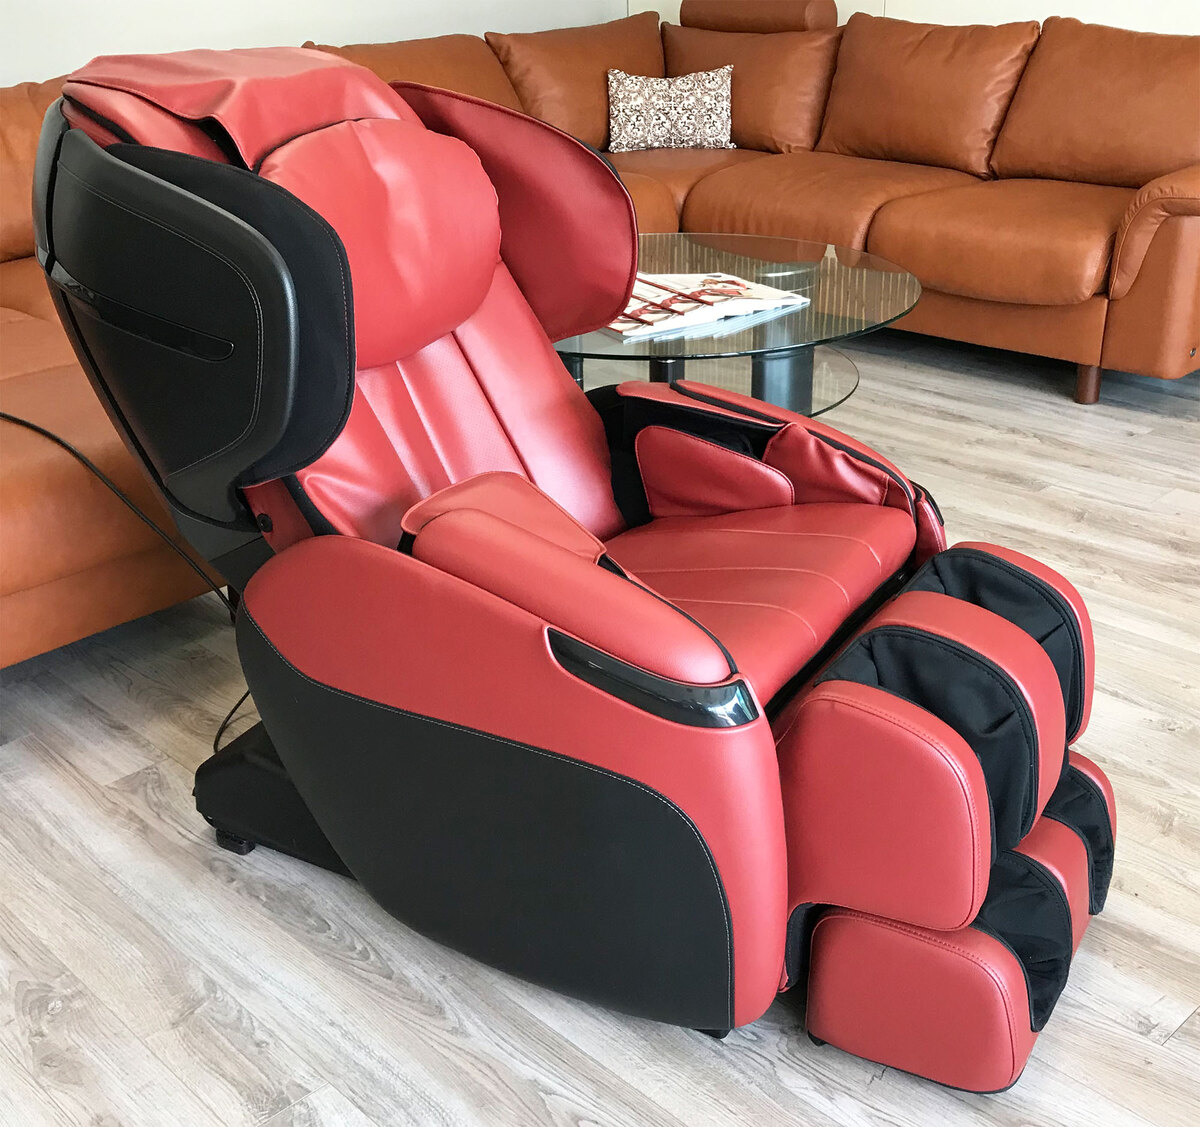 How To Build Recliner Massage Chair